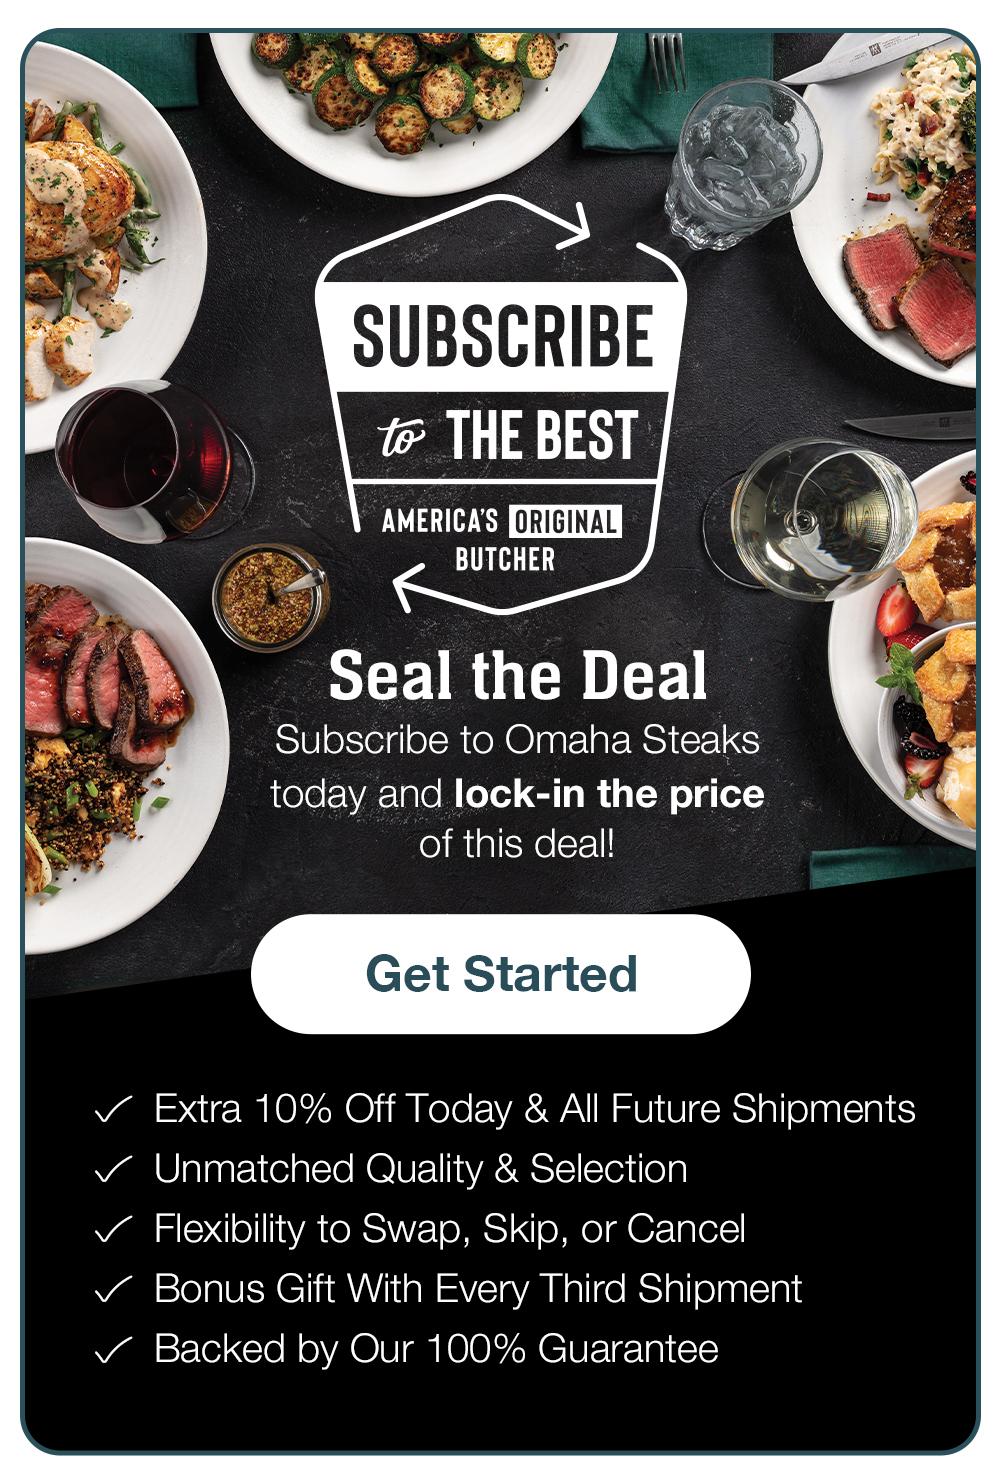 SUBSCRIBE to THE BEST - AMERICA'S ORIGINAL BUTCHER - Seal the Deal - Subscribe to Omaha Steaks today and lock-in the price of this deal! Get Started - Extra 10% Off Today & All Future Shipmentsn • Unmatched Quality & Selection • Flexibility to Change, Pause, or Cancel • Bonus Gift in Every Third Shipment • Backed by Our 100% Guarantee